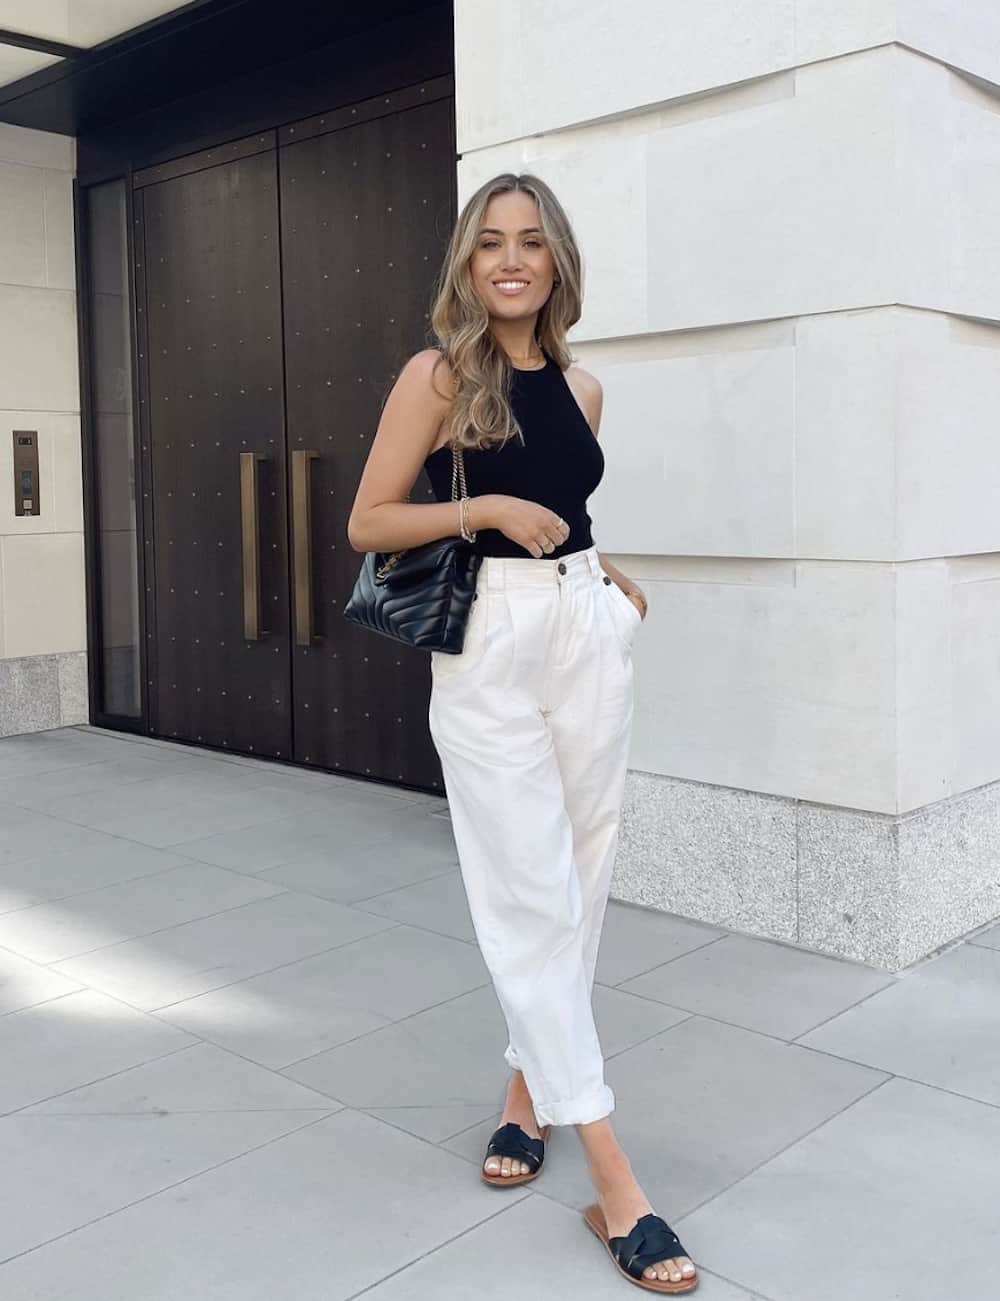 image of a woman in a cute outfit with white trousers, a black tank top, and black sandals